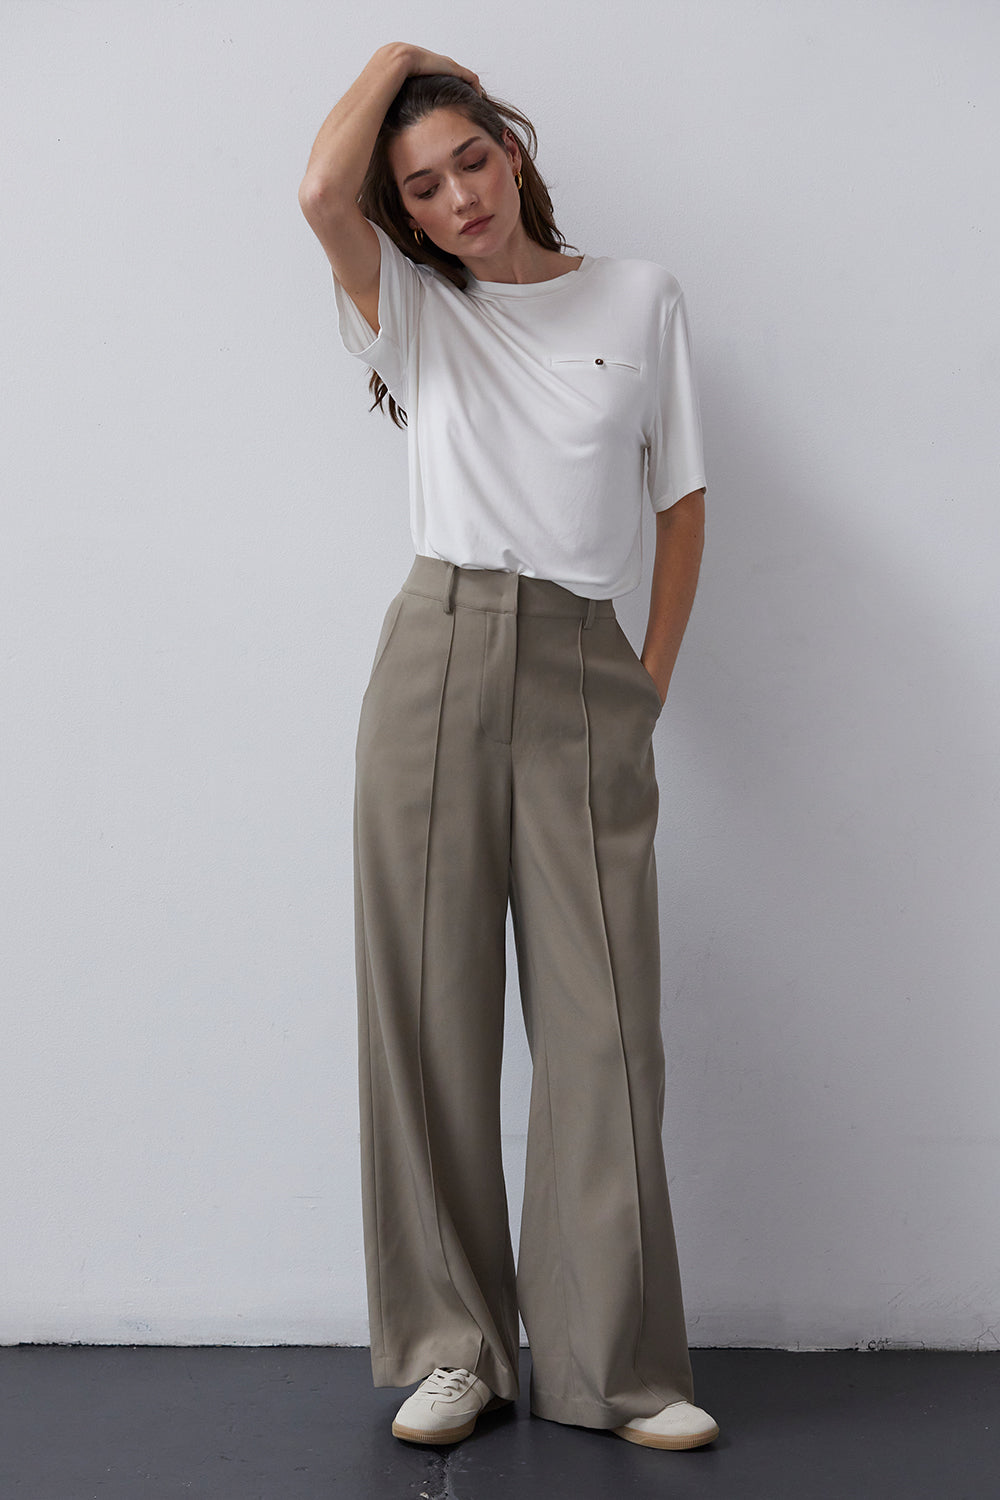 woman wearing wide pants and white tee shirt capsule wardrobe essential